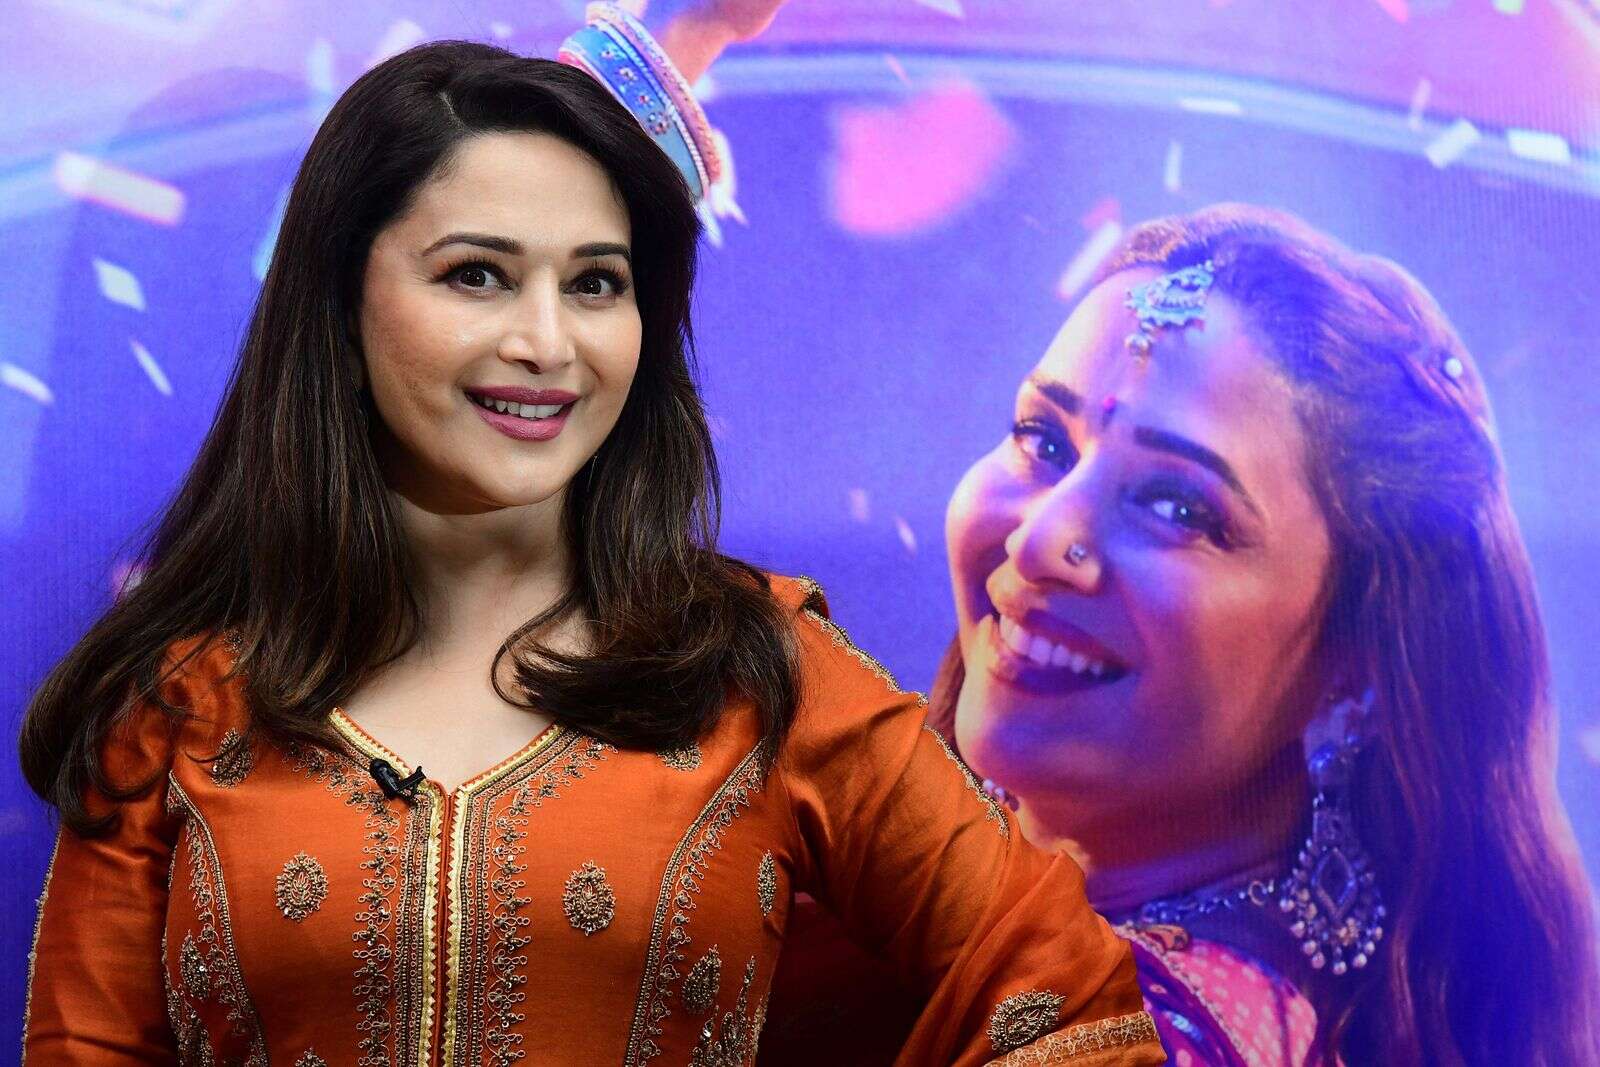 Netflix gets sued for insulting Bollywood star Madhuri Dixit on Big Bang Theory show